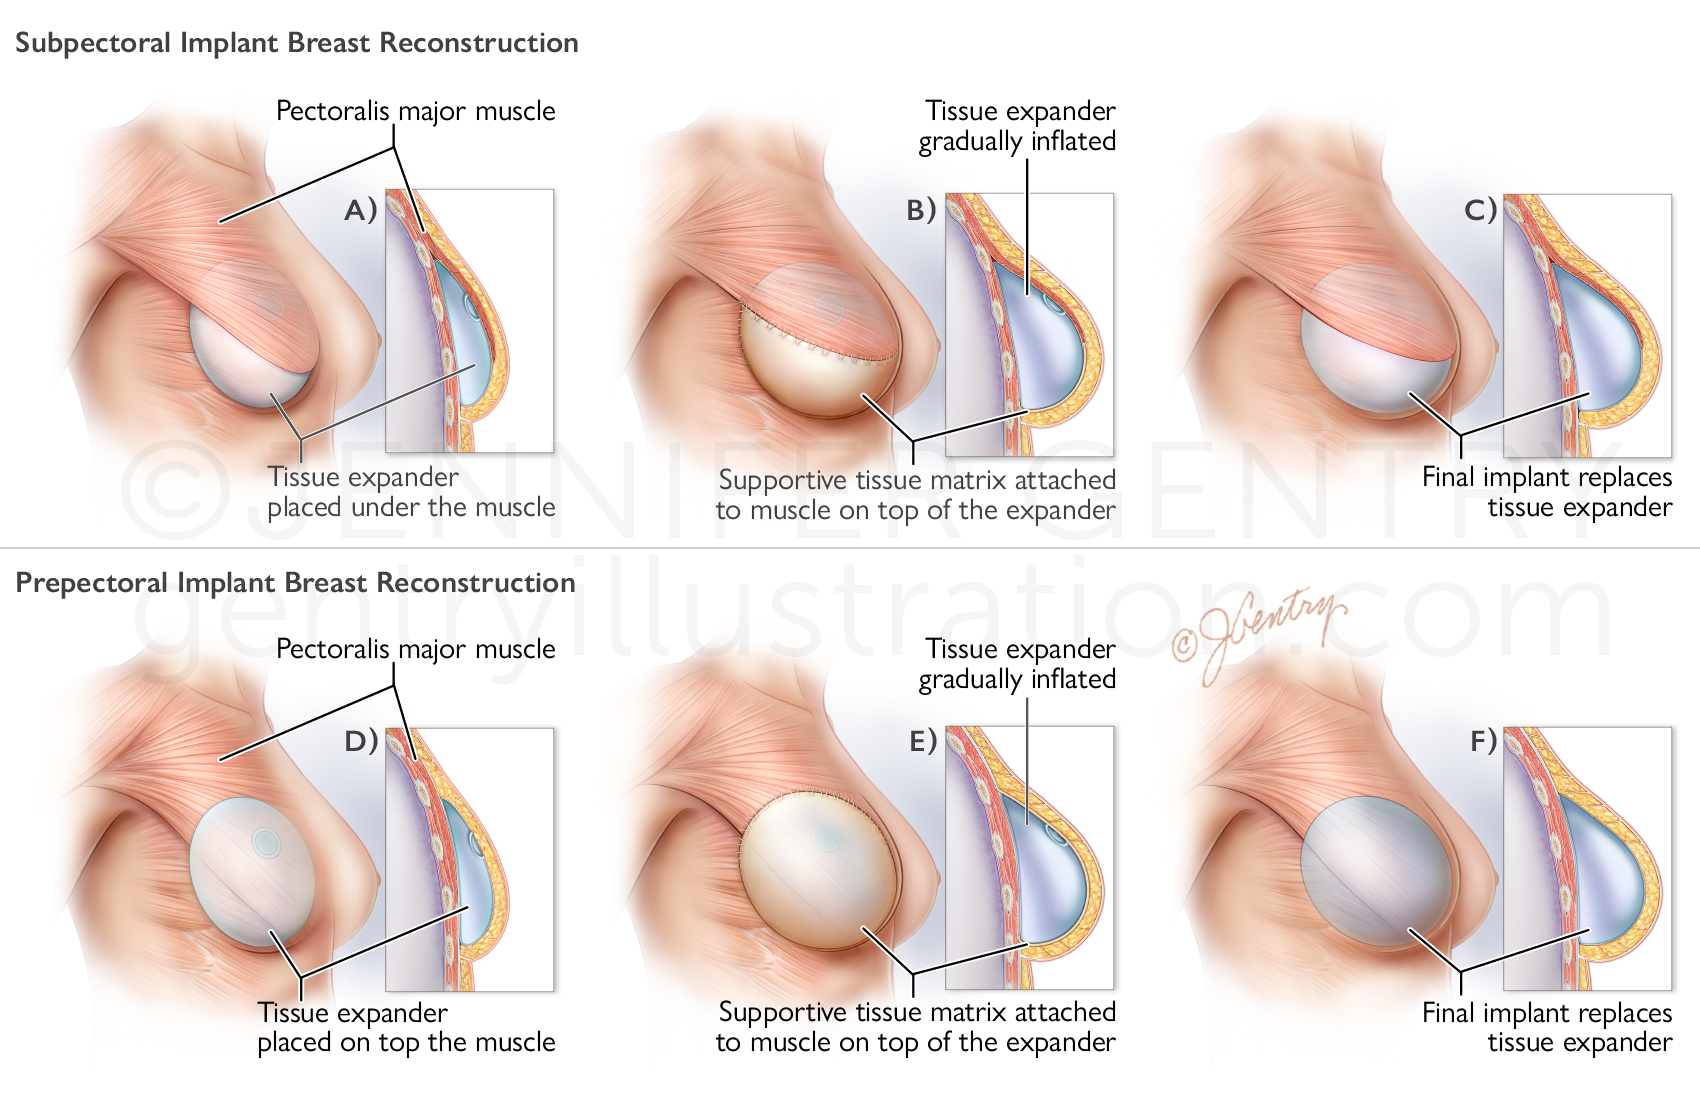 Breast Reconstruction: Prepectoral and Subpectoral Implant Procedure using Tissue Expander